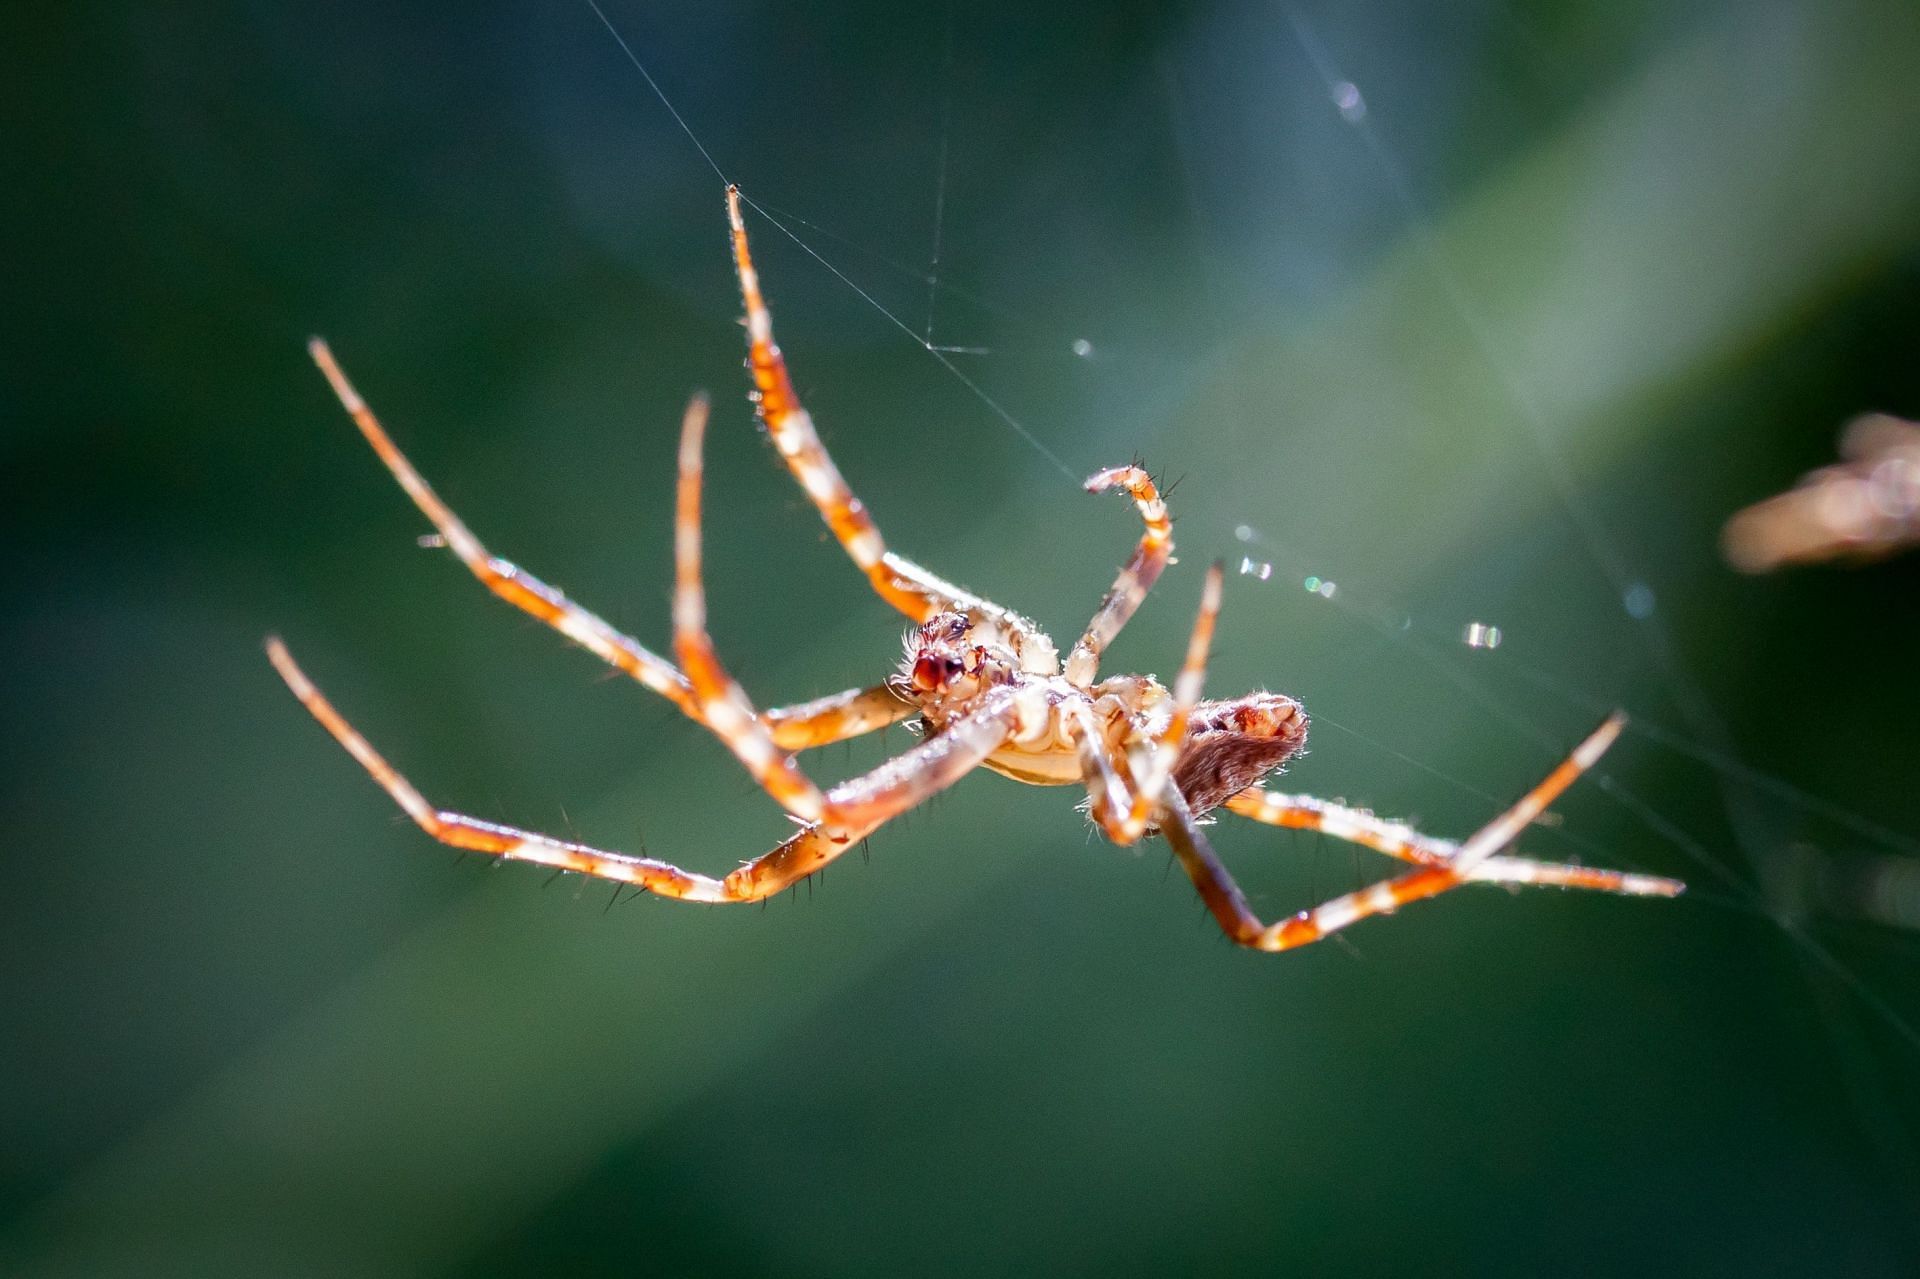 If the spider that bit you is venomous, additional symptoms may occur. (Photo by Manuel Bartsch/Pexels)